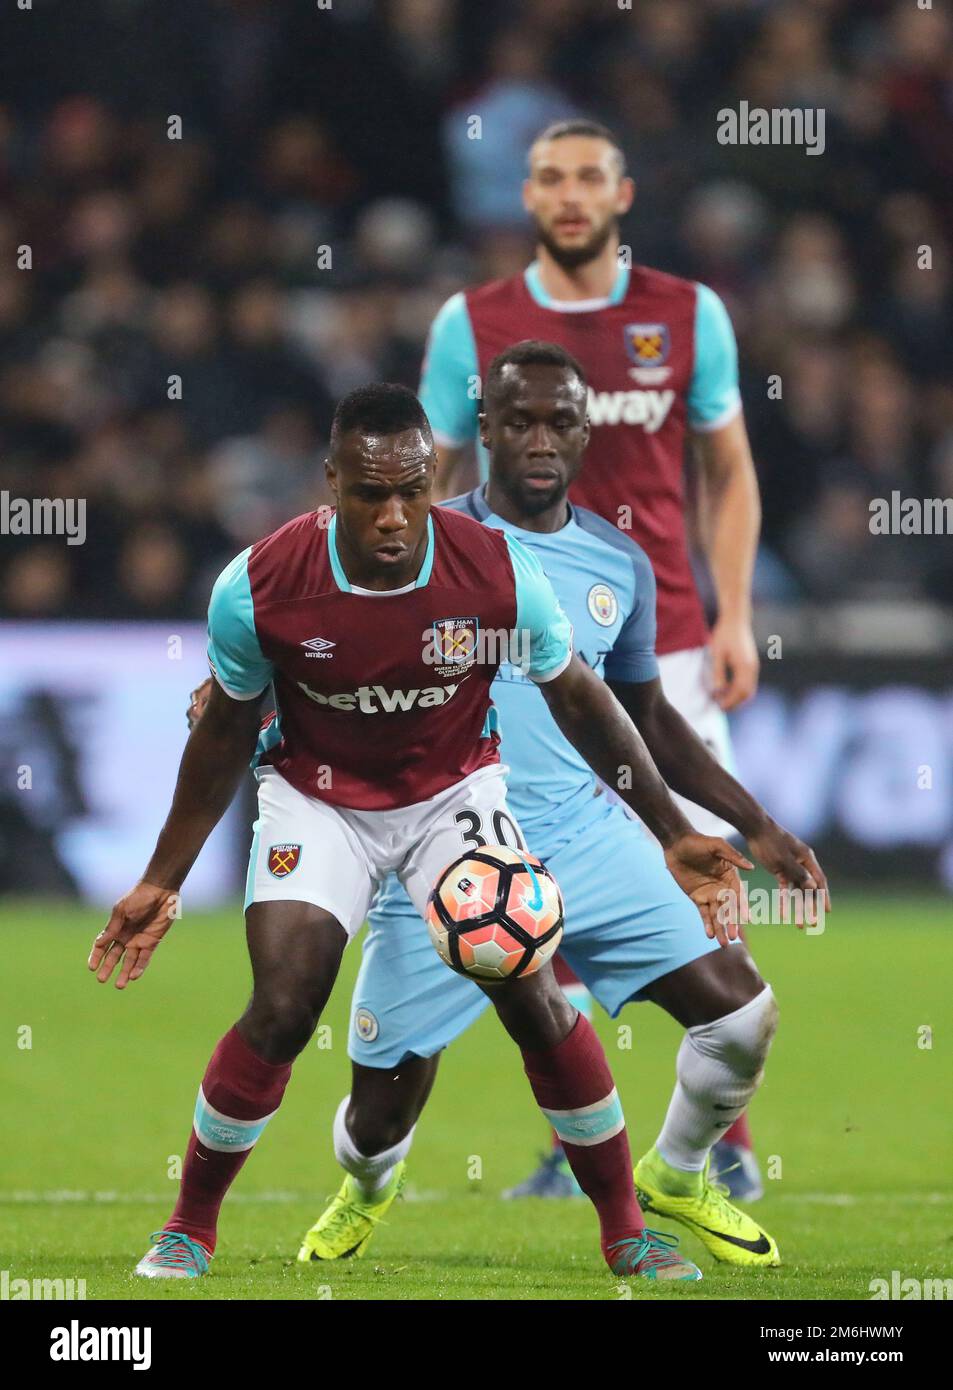 Michail Antonio of West Ham United shields the ball from Bacary Sagna of Manchester City - West Ham United v Manchester City, FA Cup Third round, The London Stadium, London - 6th January 2017. Stock Photo